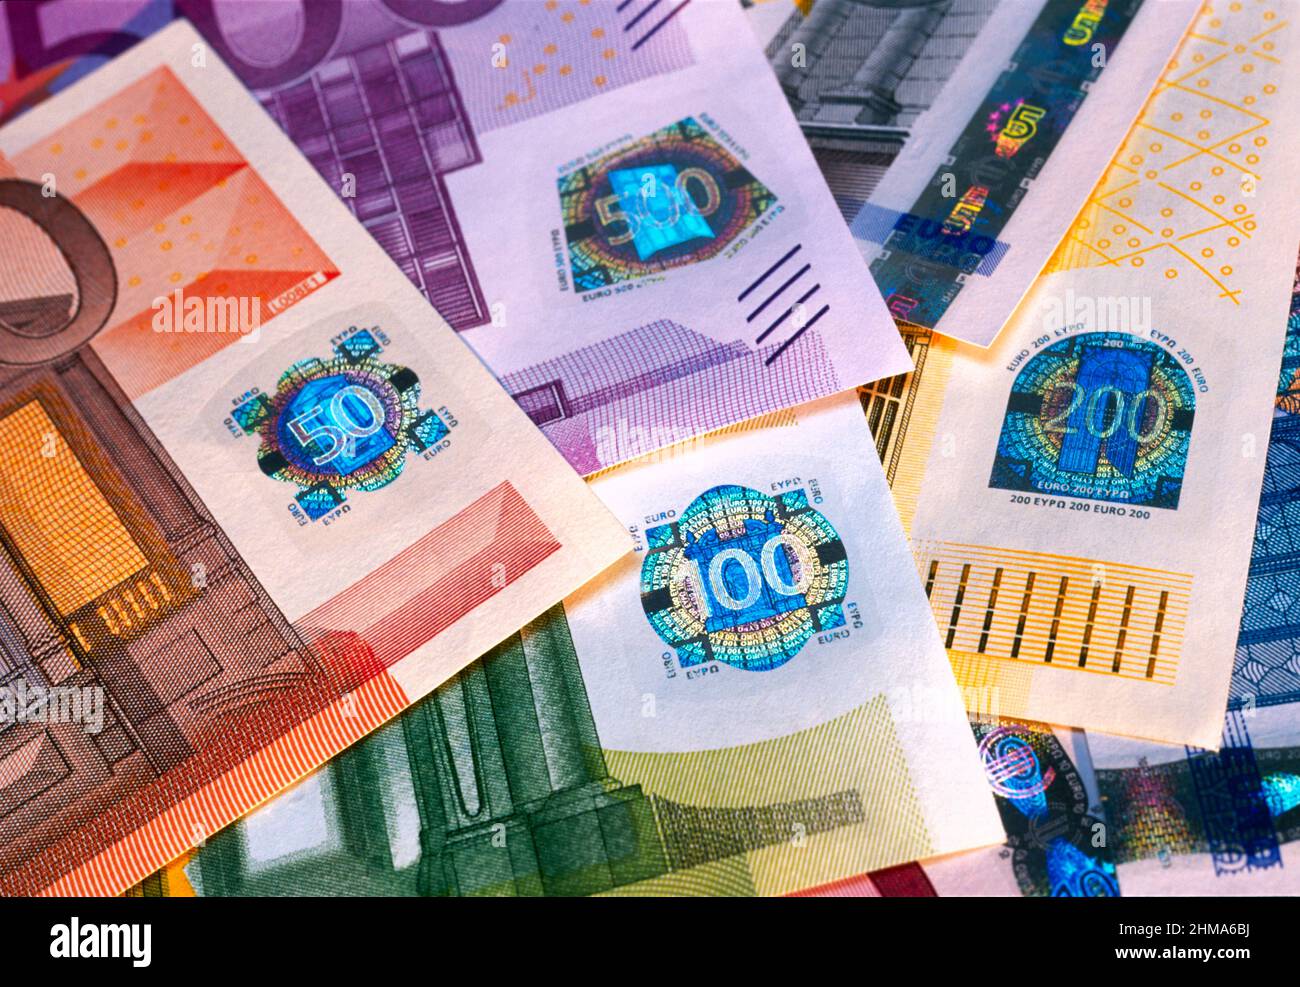 Euro notes, showing security holograms, Stock Photo